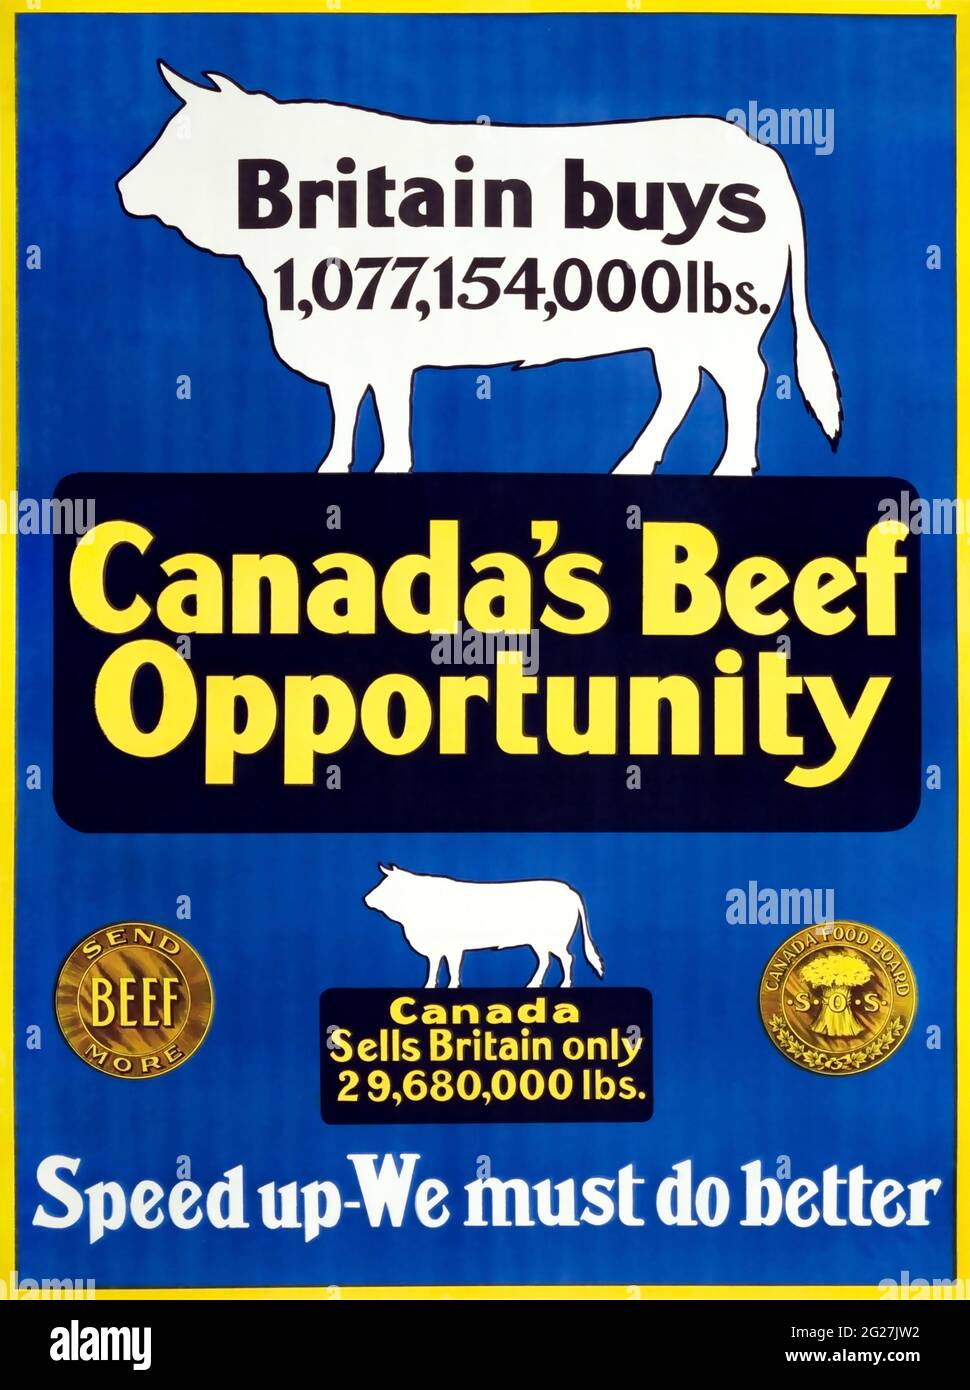 WW1 statistics mentioning the volume of beef that Britain imports vis-a-vis the quantity Canada supplies to it. Stock Photo